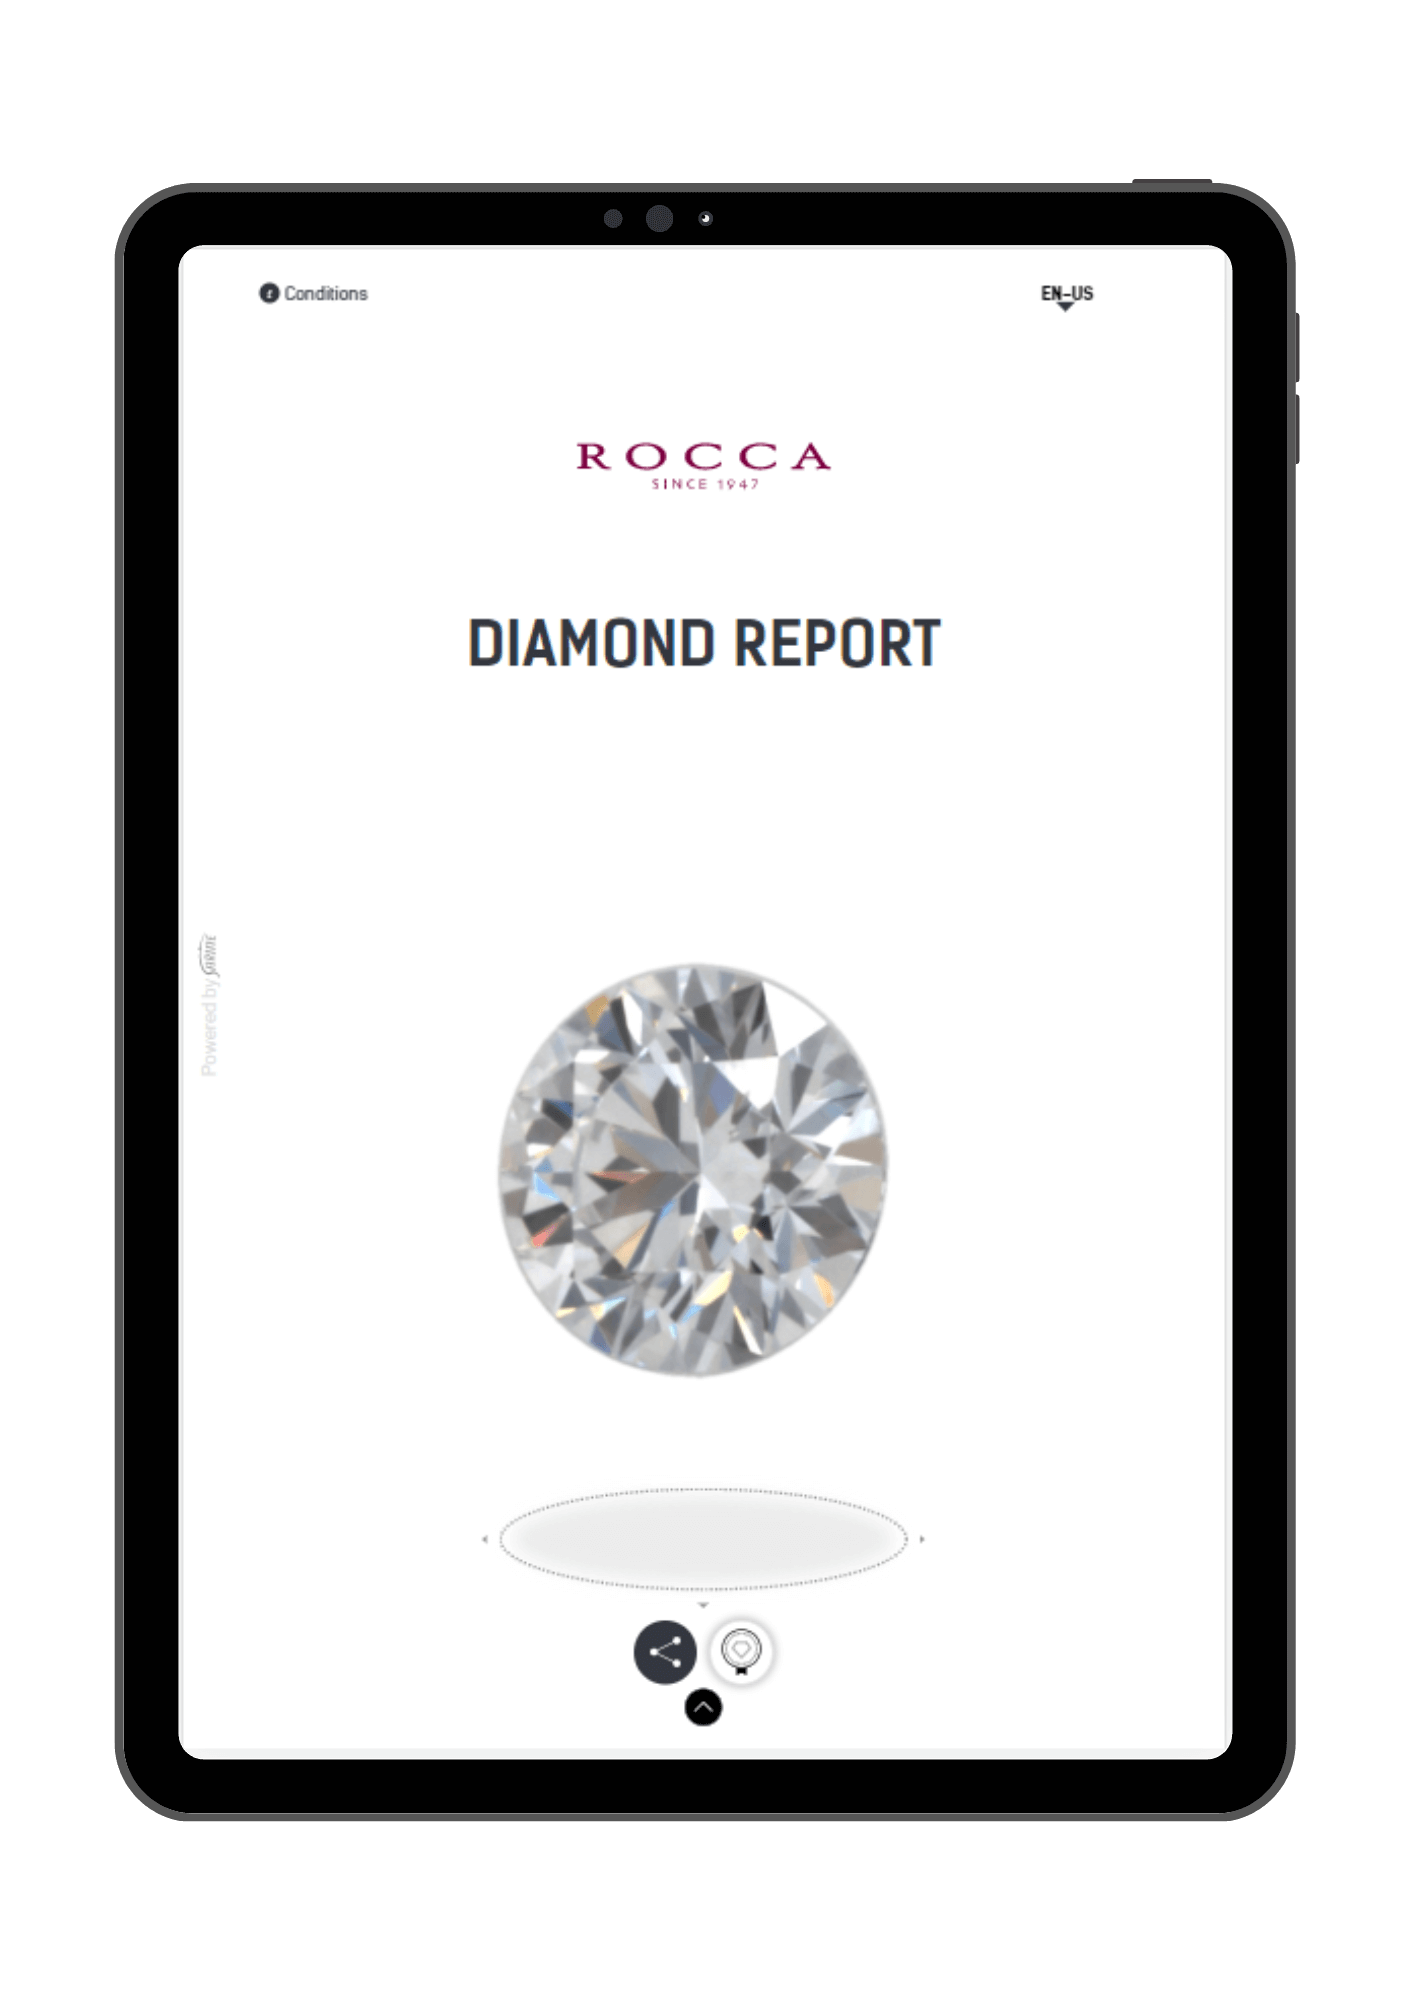 Diamond grading reports and certifications